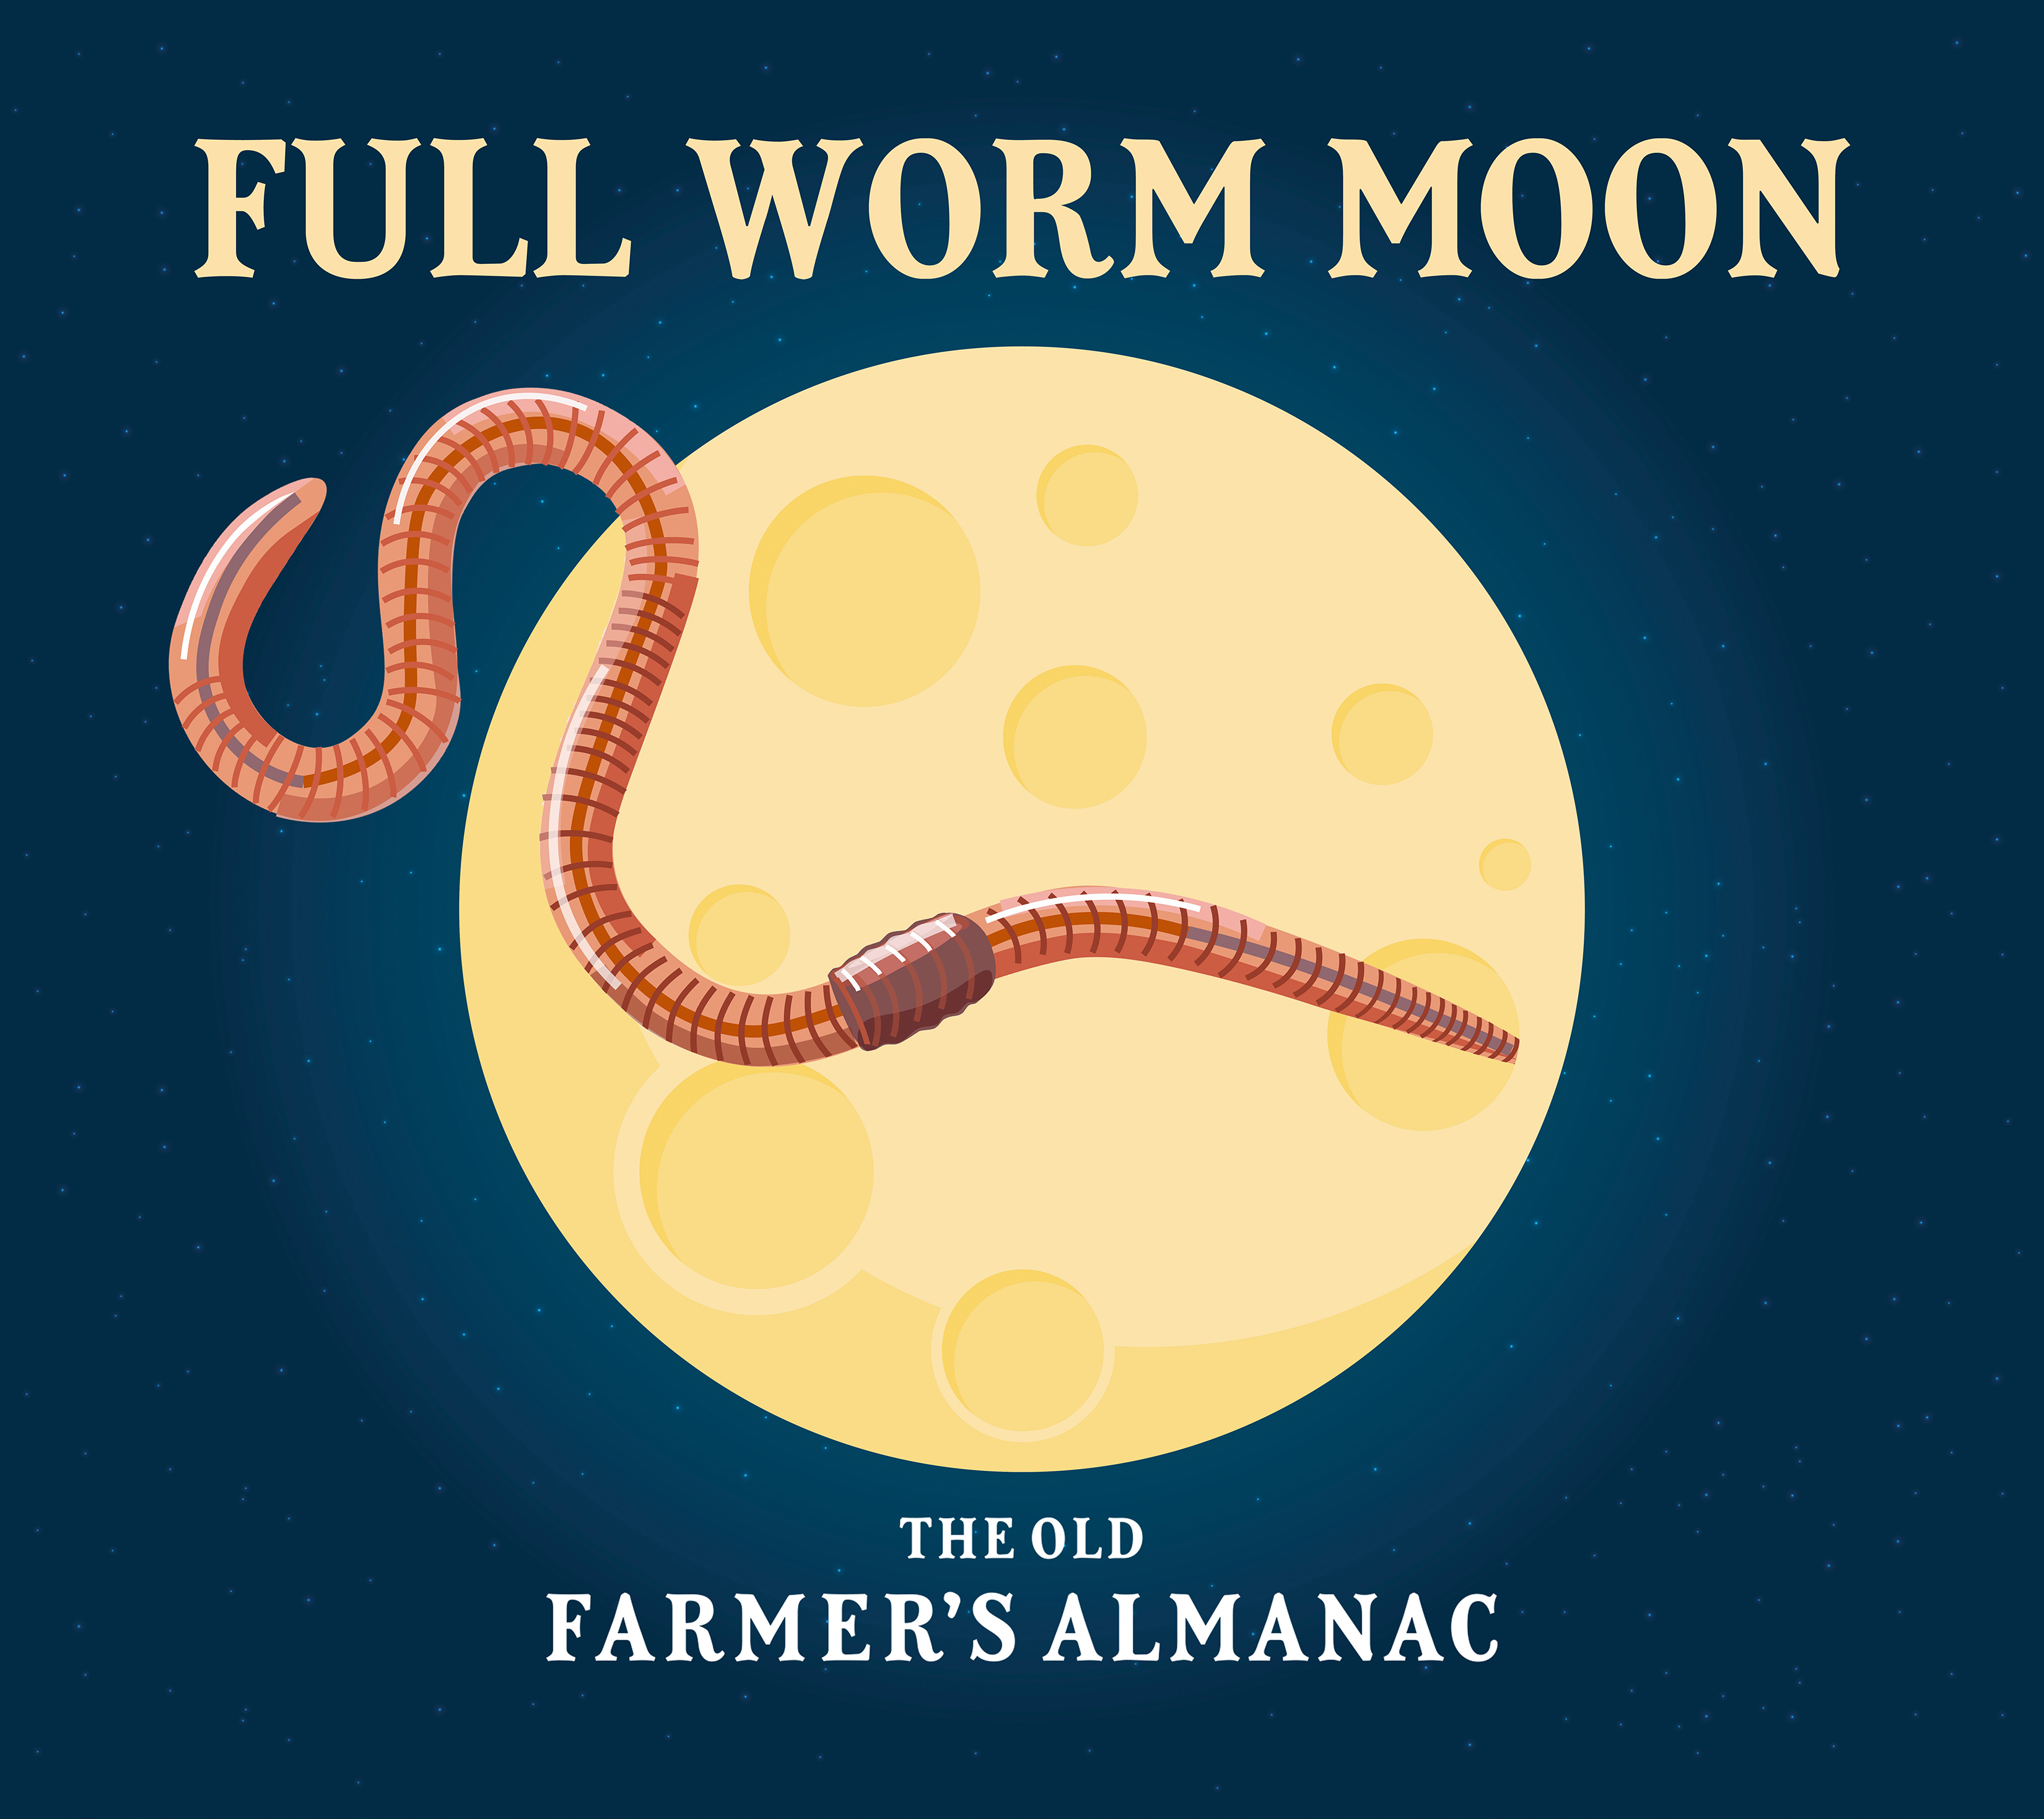 Full Moon In March 2020 The Super Worm Moon The Old Farmer S